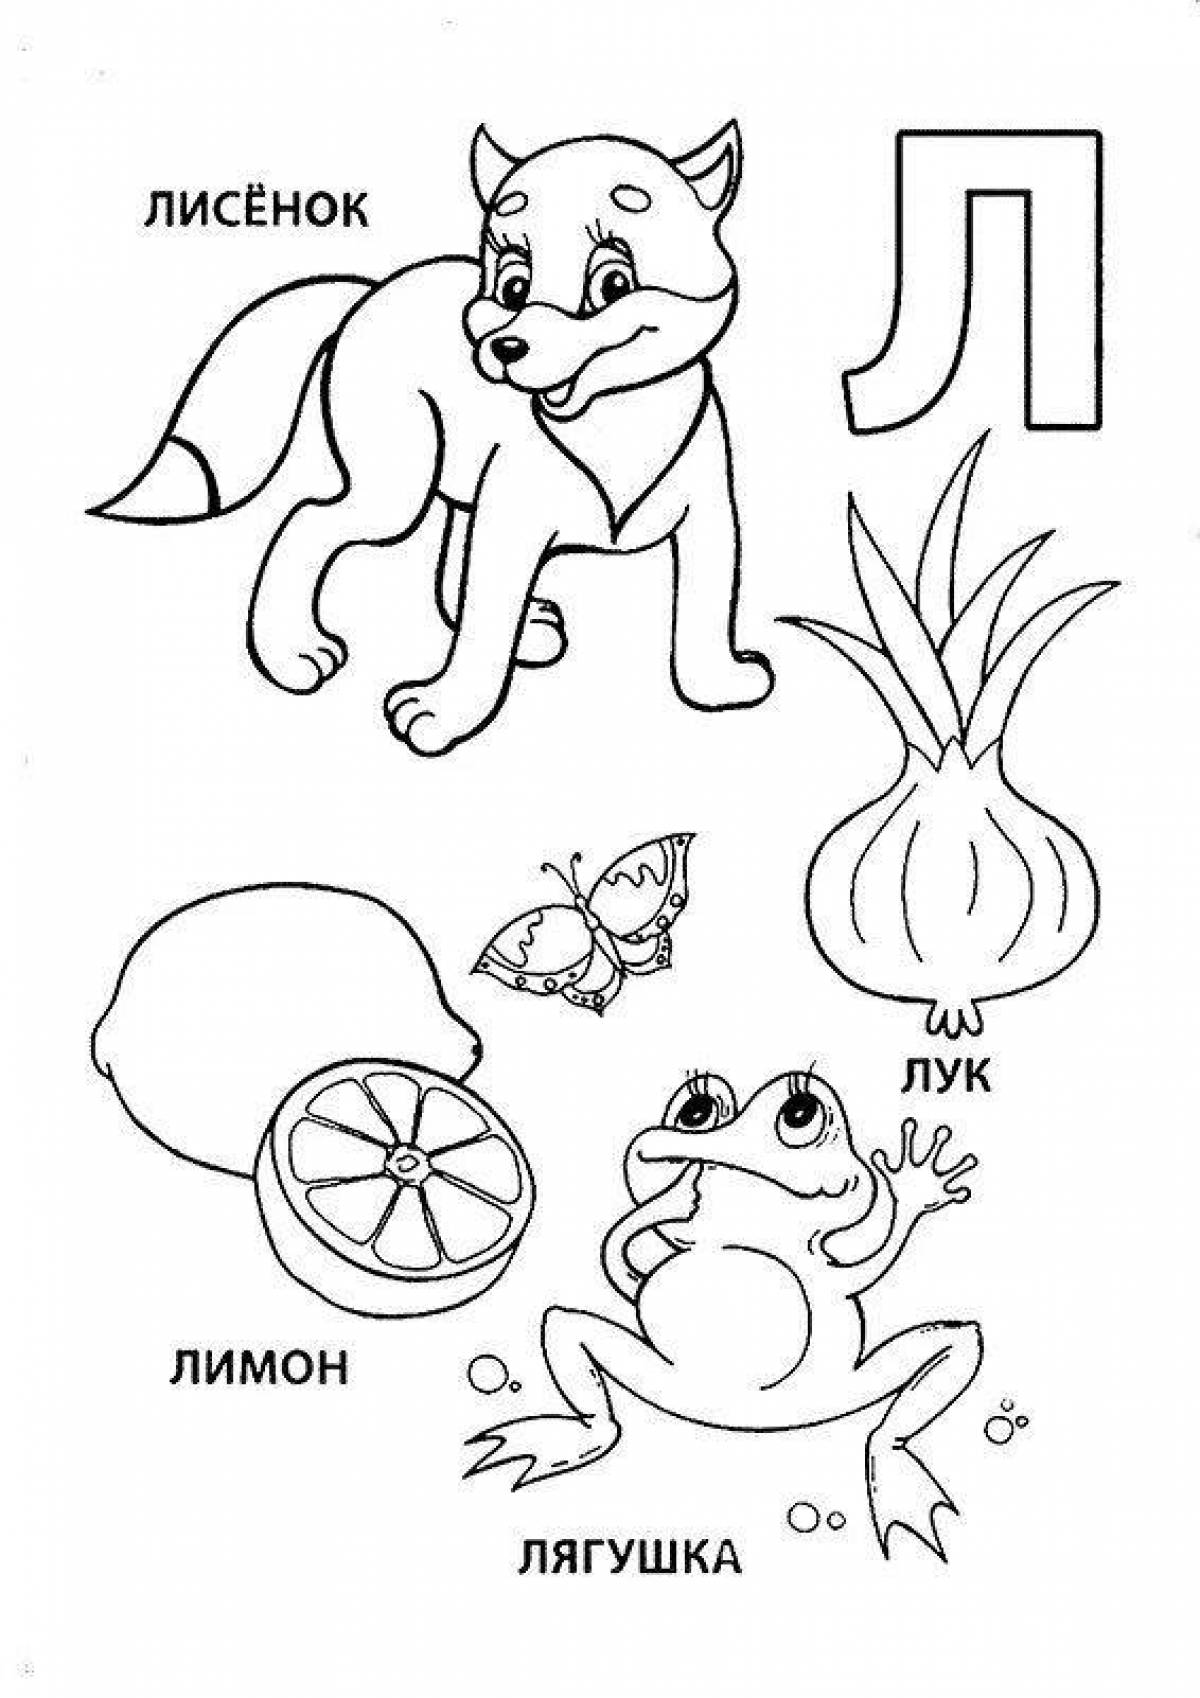 A fun alphabet coloring book for 5-6 year olds